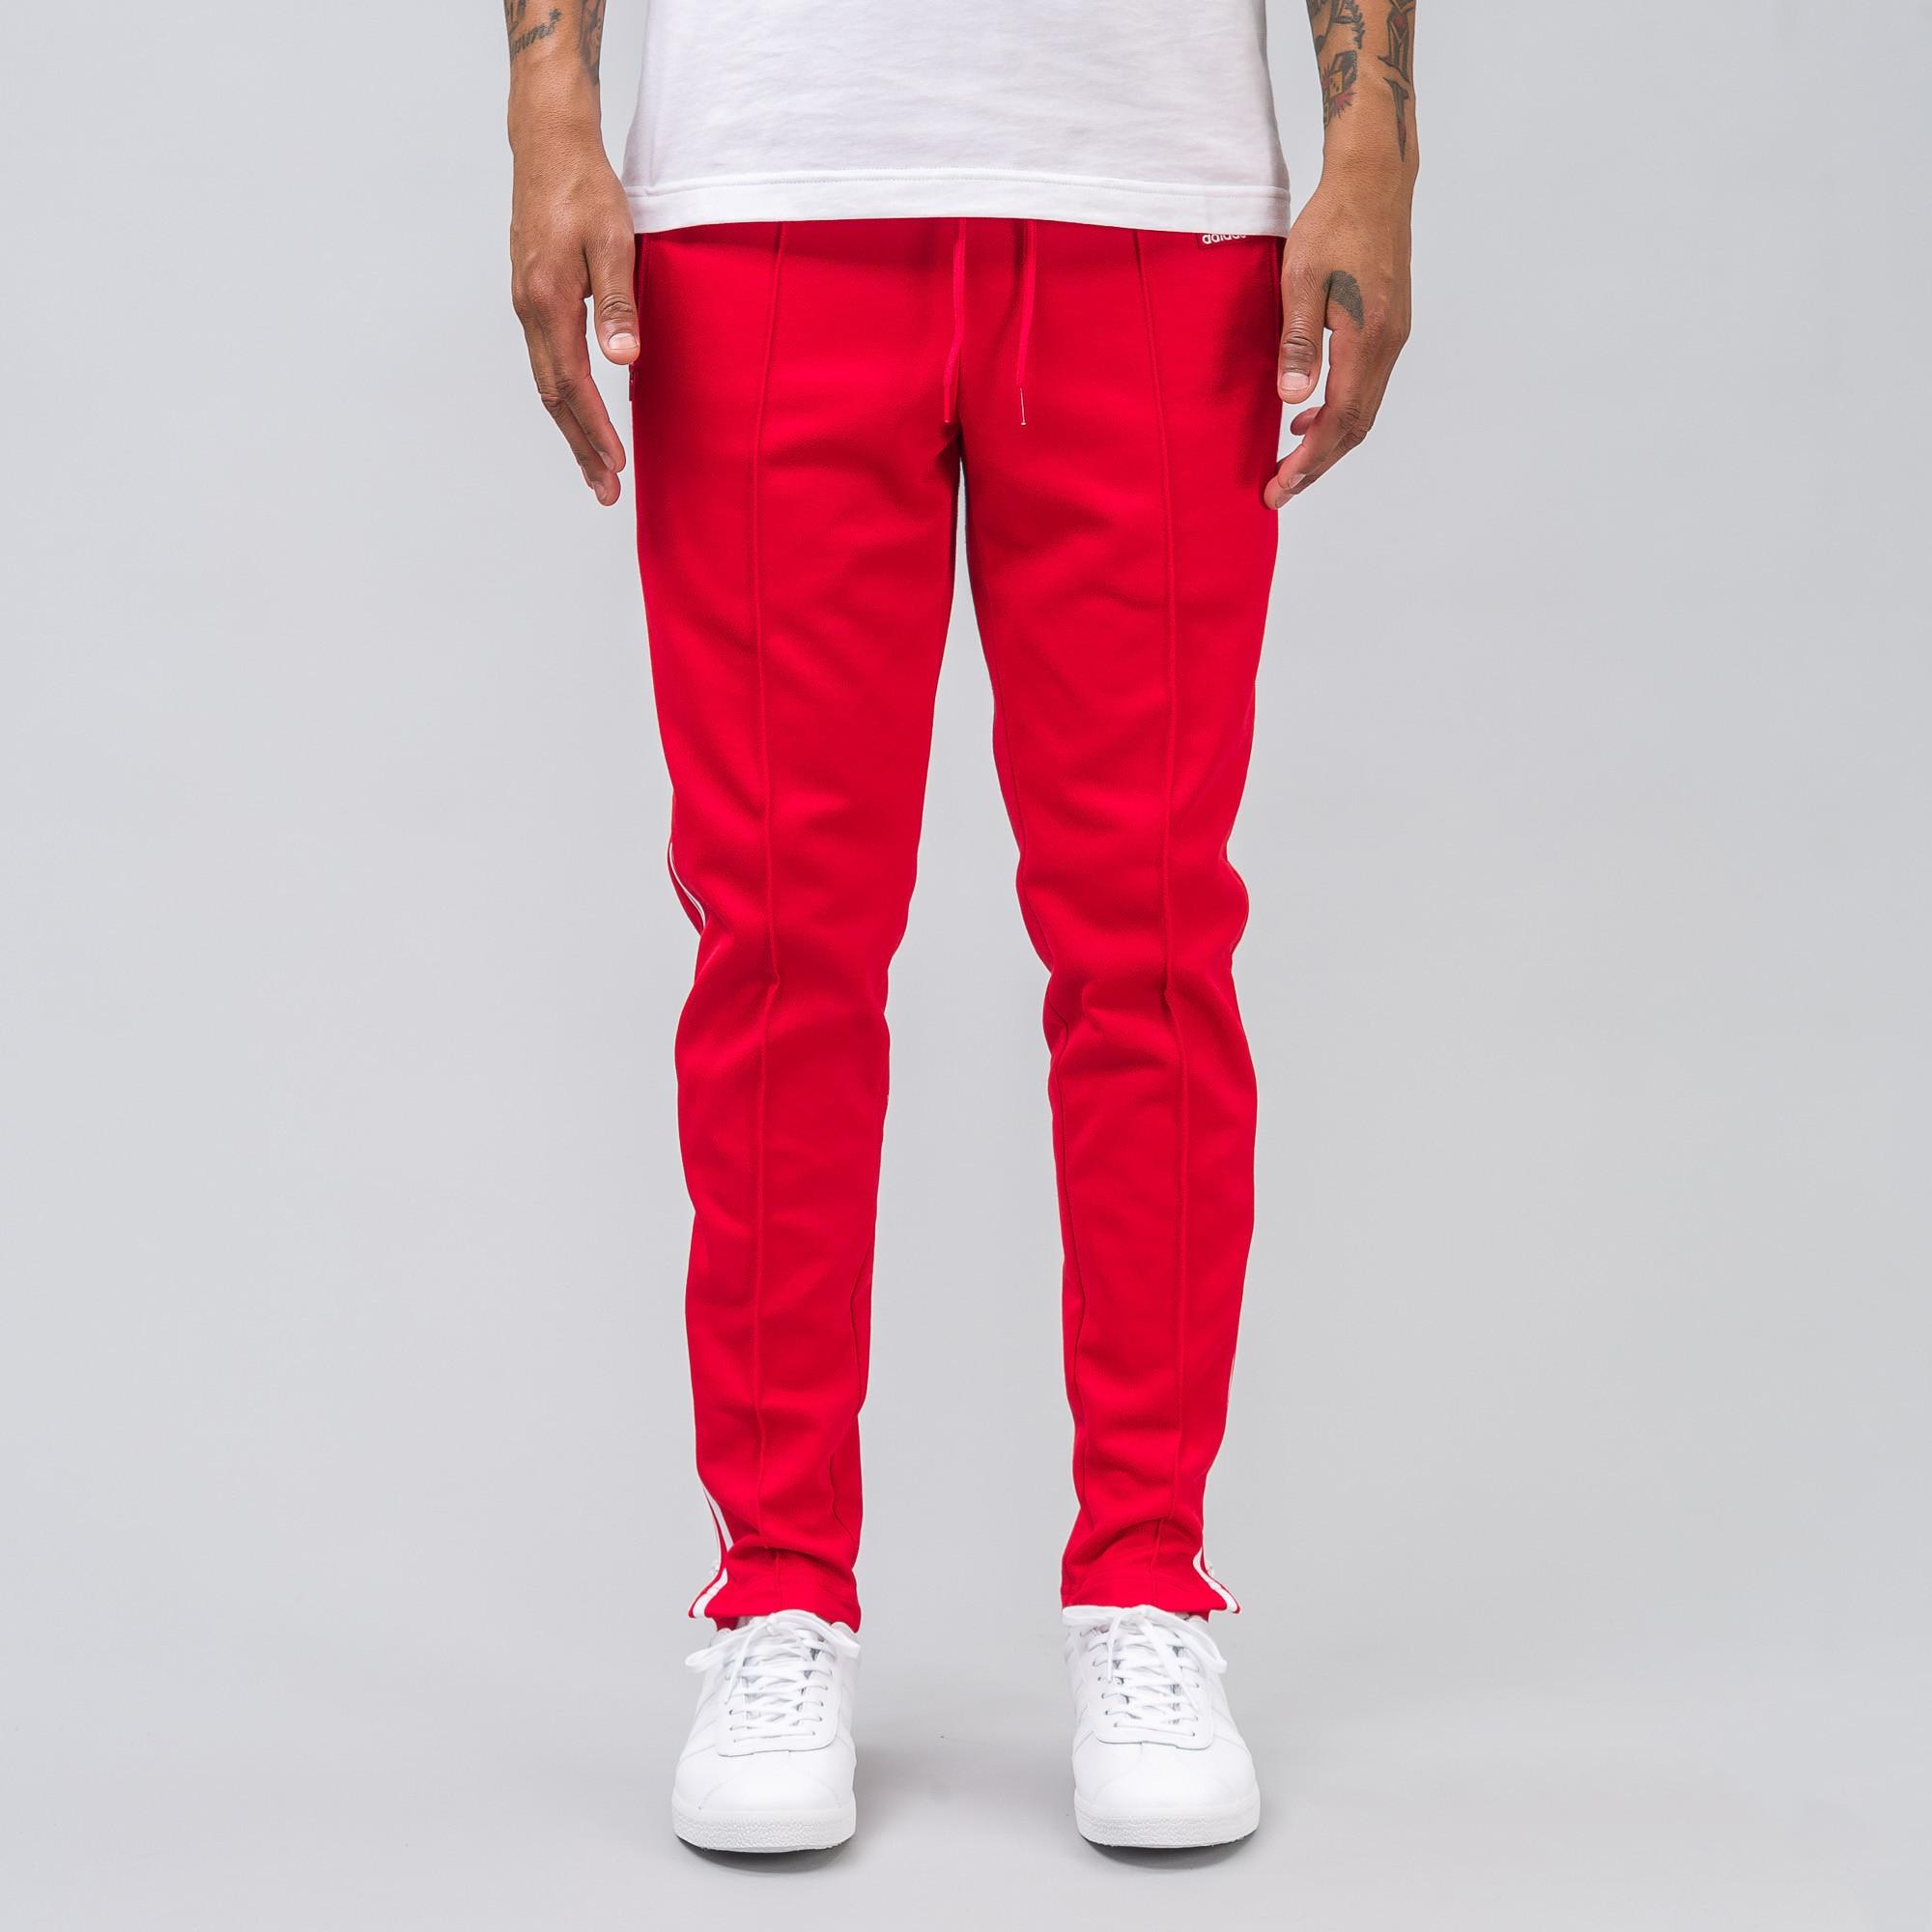 adidas Originals Beckenbauer Mig Tracksuit in Red/White (Red) for Men | Lyst